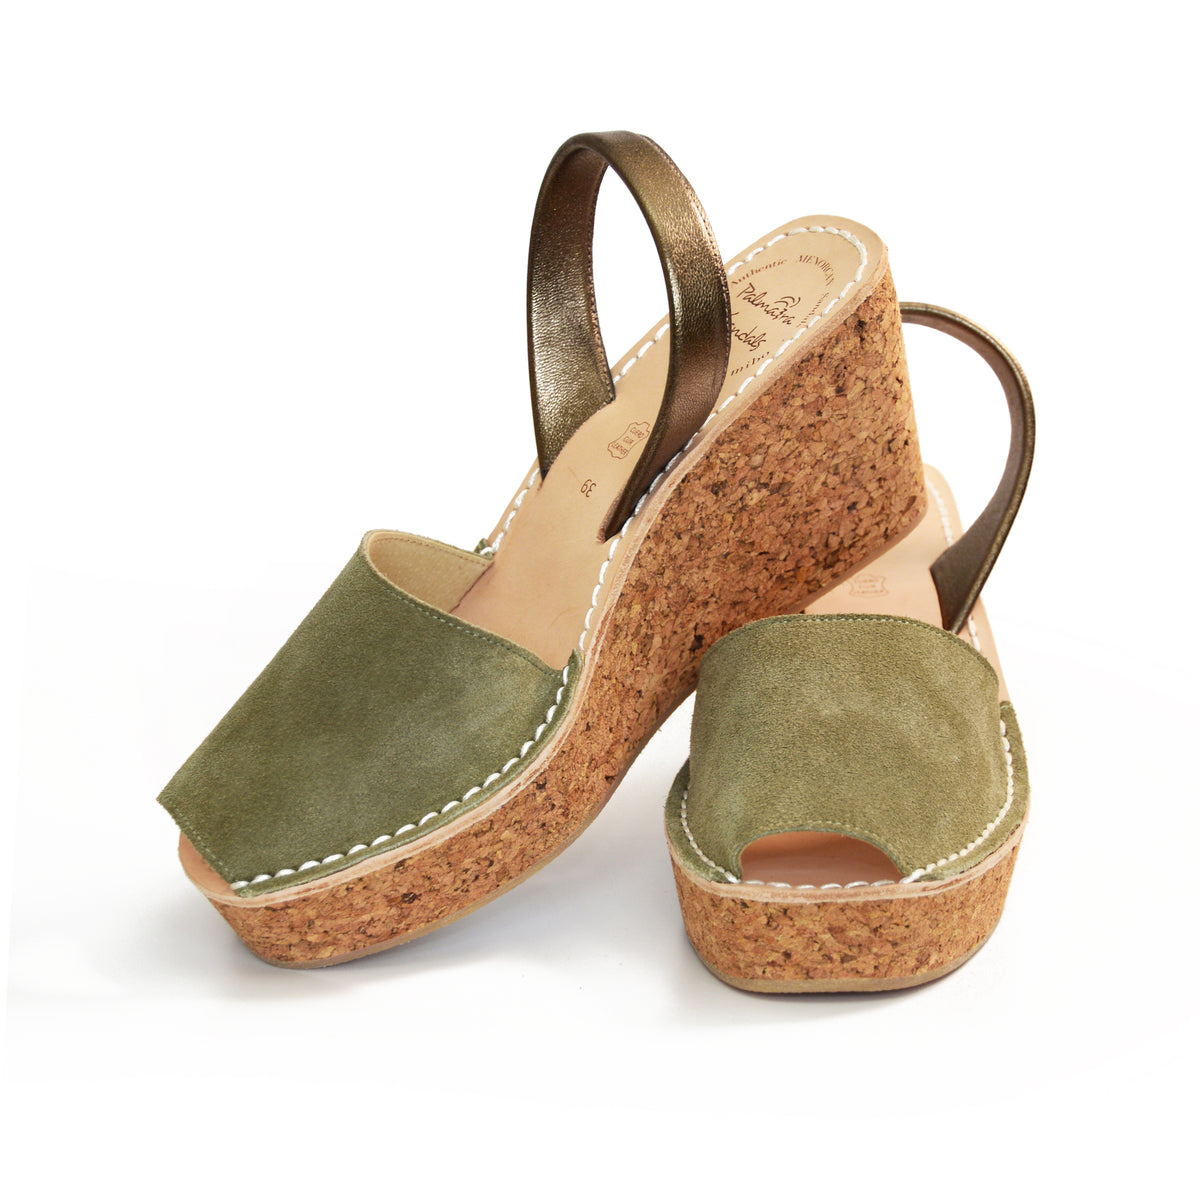 Khaki suede leather mid height avarca sandals with a lightweight cork wedge sole